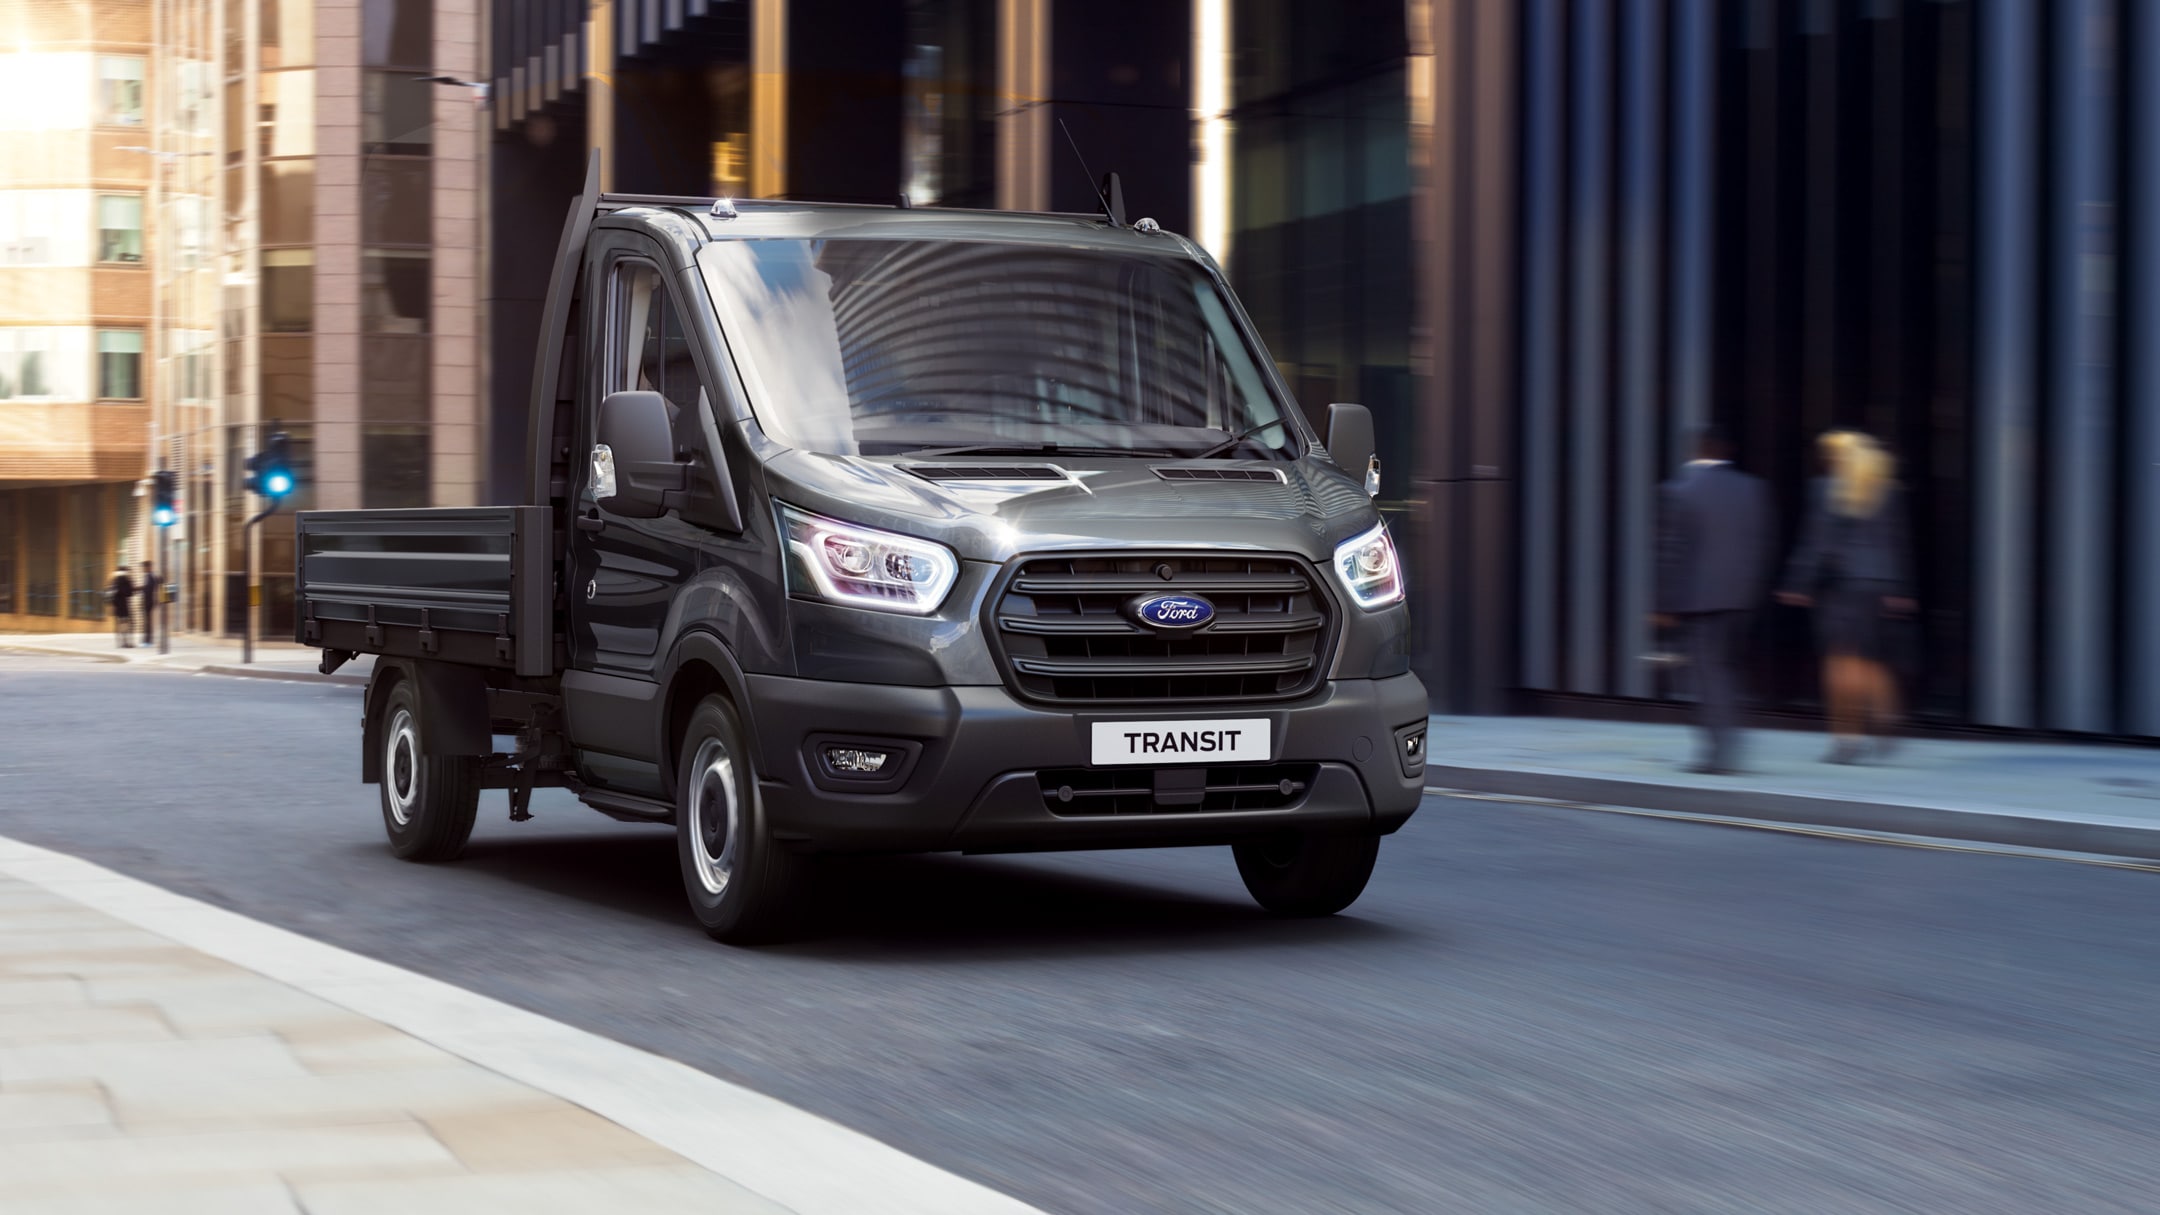 New Ford Transit Chassis Cab driving on road